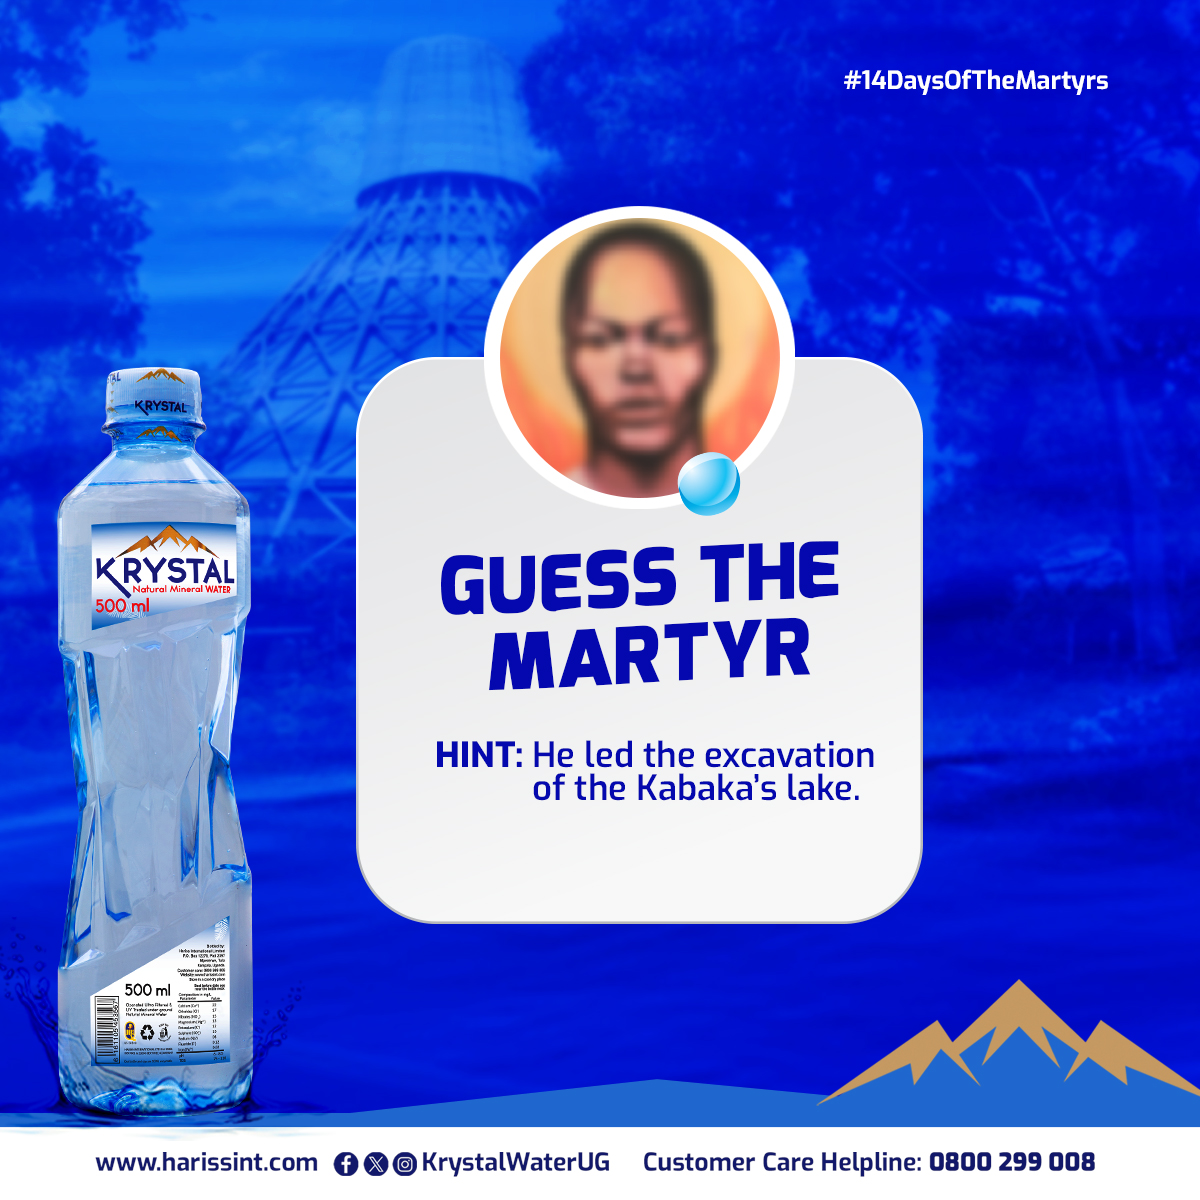 Martyrs Trivia: Can you guess the historical figure shown in the image? He led the excavation of the Kabaka's lake. One person with the correct answer will be selected randomly at 5 PM and rewarded with UGX 50,000. #14DaysOfTheMartyrs #UgandaMartyrs